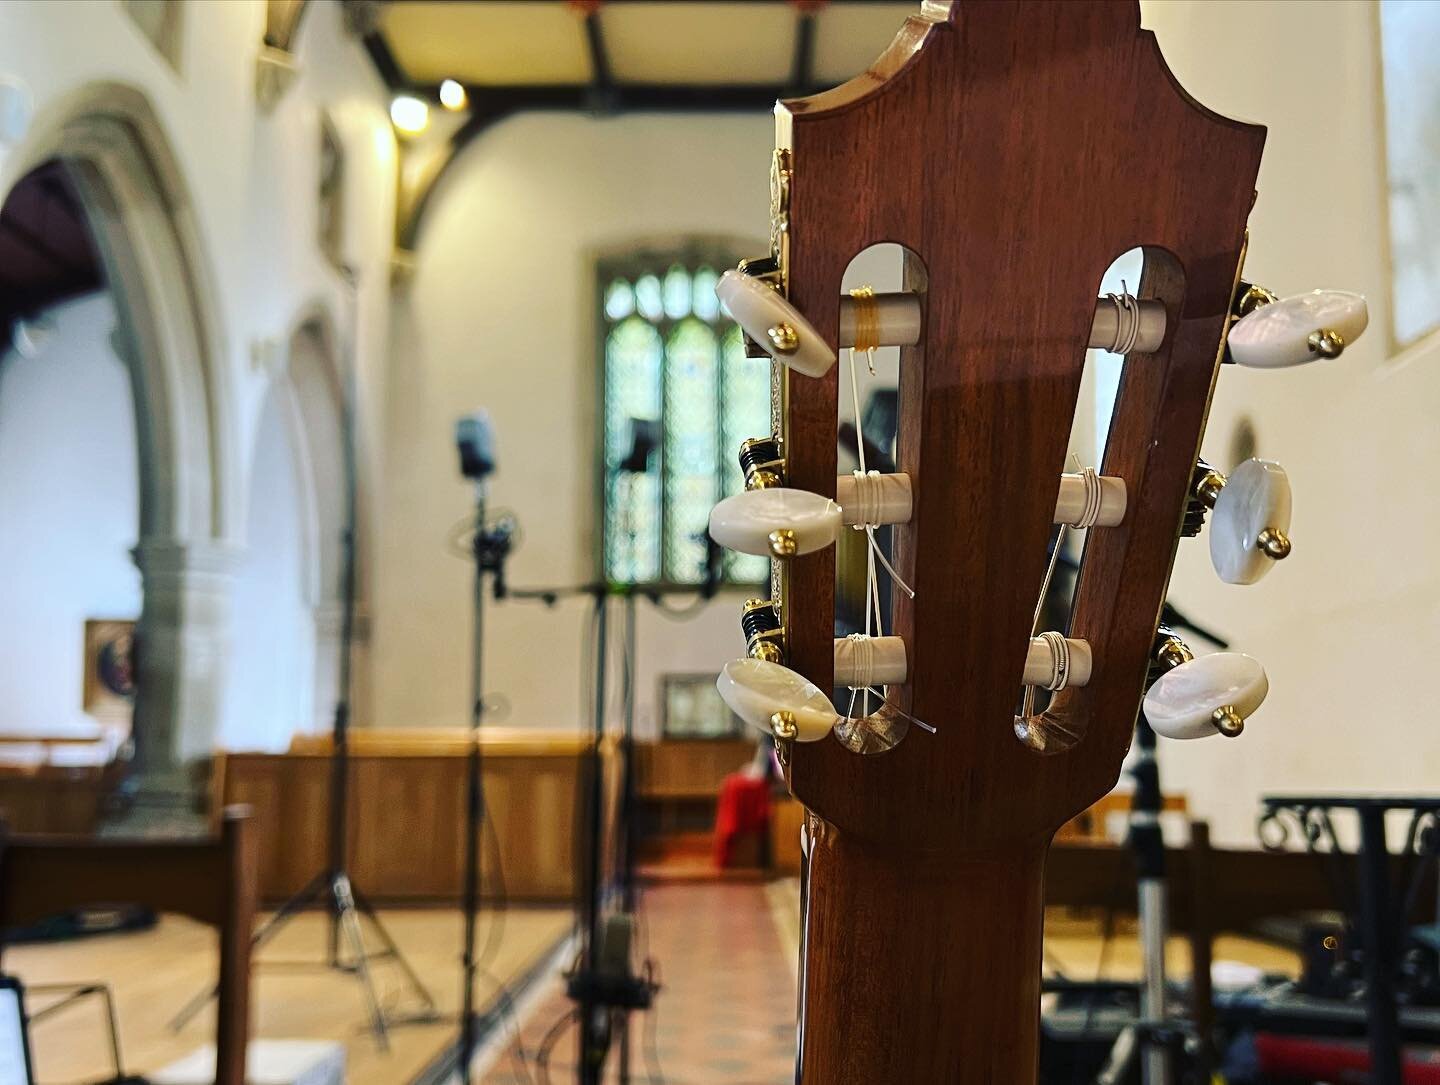 Recording guitar in a c12th country church with @fredlawtonguitar 

#classicalguitar #recordingsession